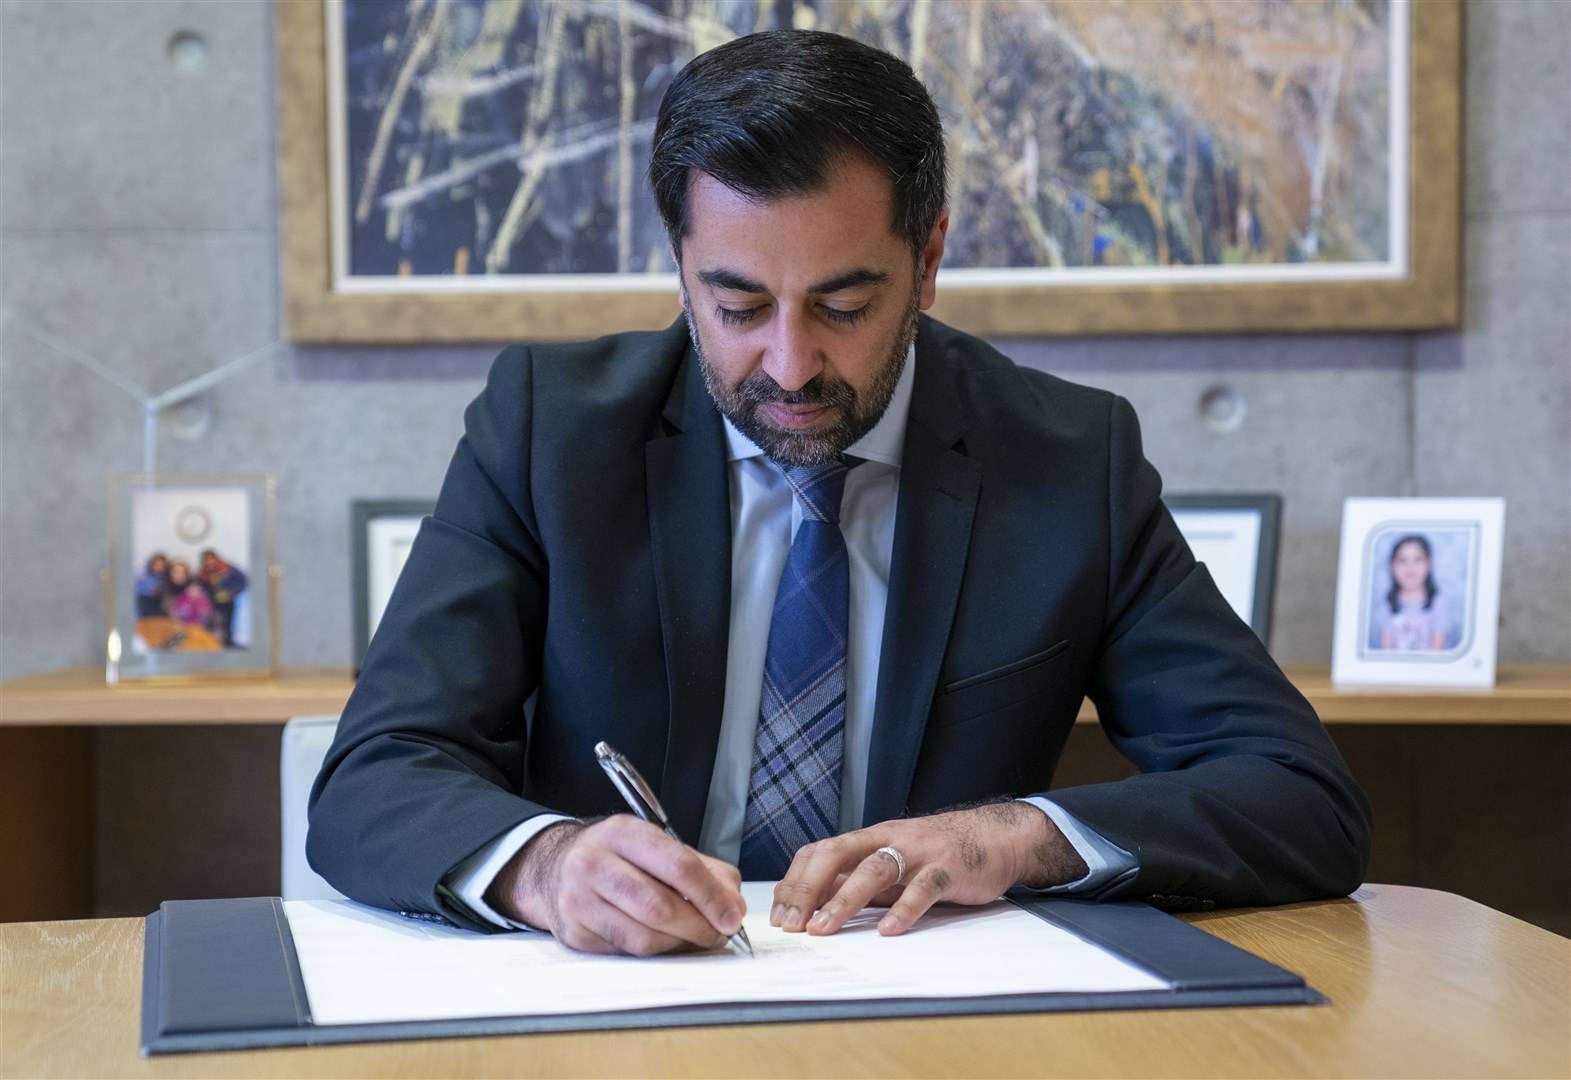 Outgoing First Minister Humza Yousaf signs his official resignation letter at the Scottish Parliament in Edinburgh. (Jane Barlow/PA)